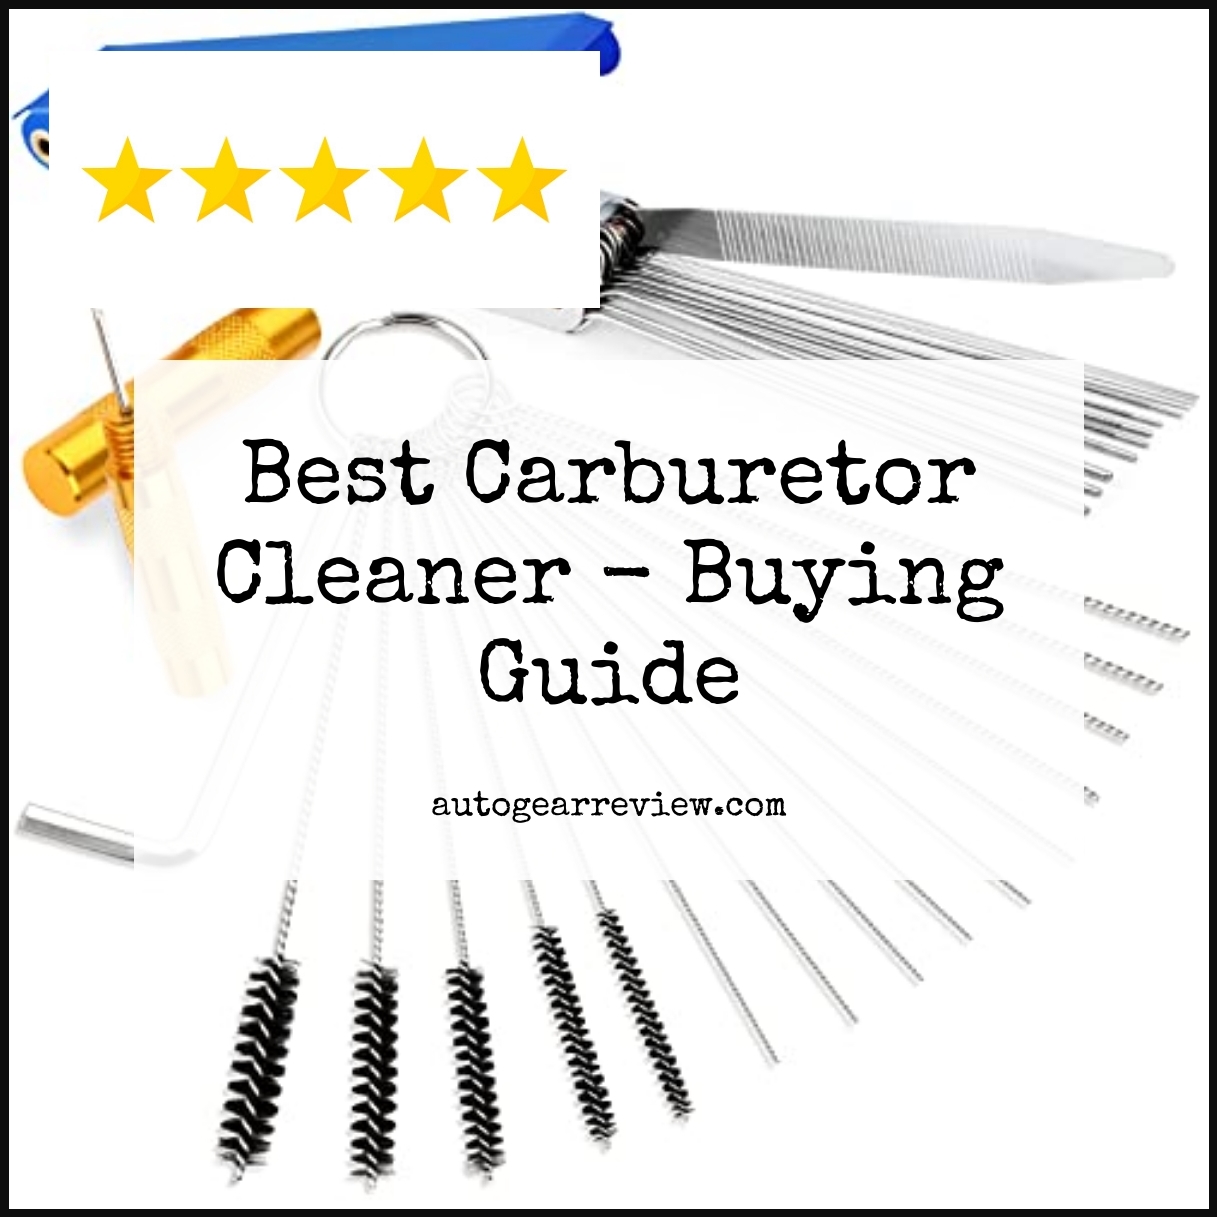 Best Carburetor Cleaner - Buying Guide & Review - Autogearreview.com